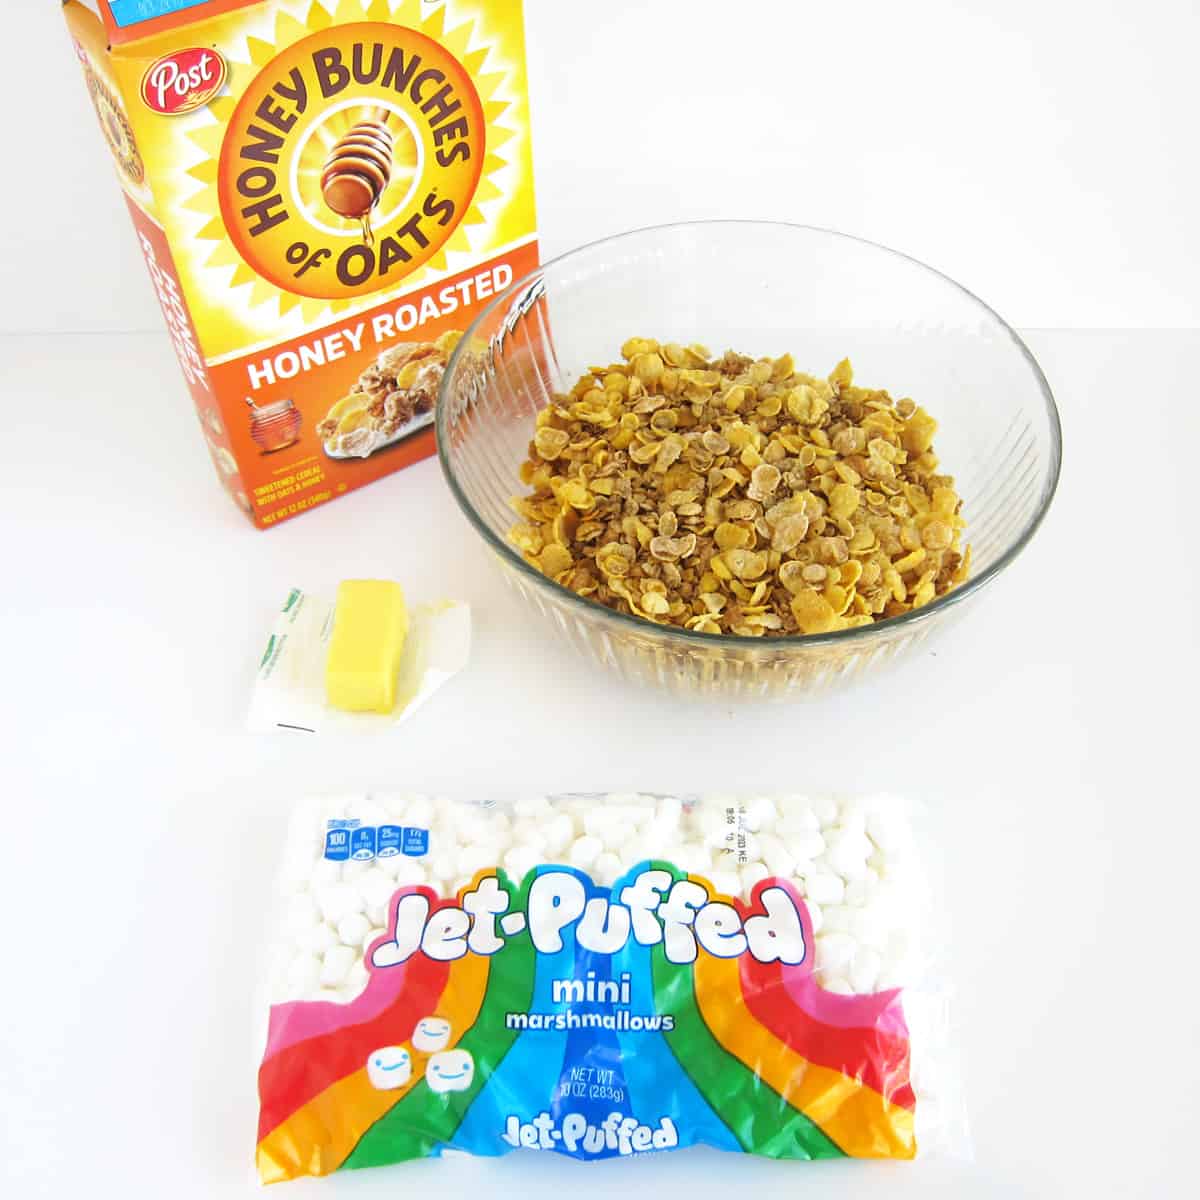 Honey Bunches of Oats Cereal Bars ingredients including butter and marshmallows